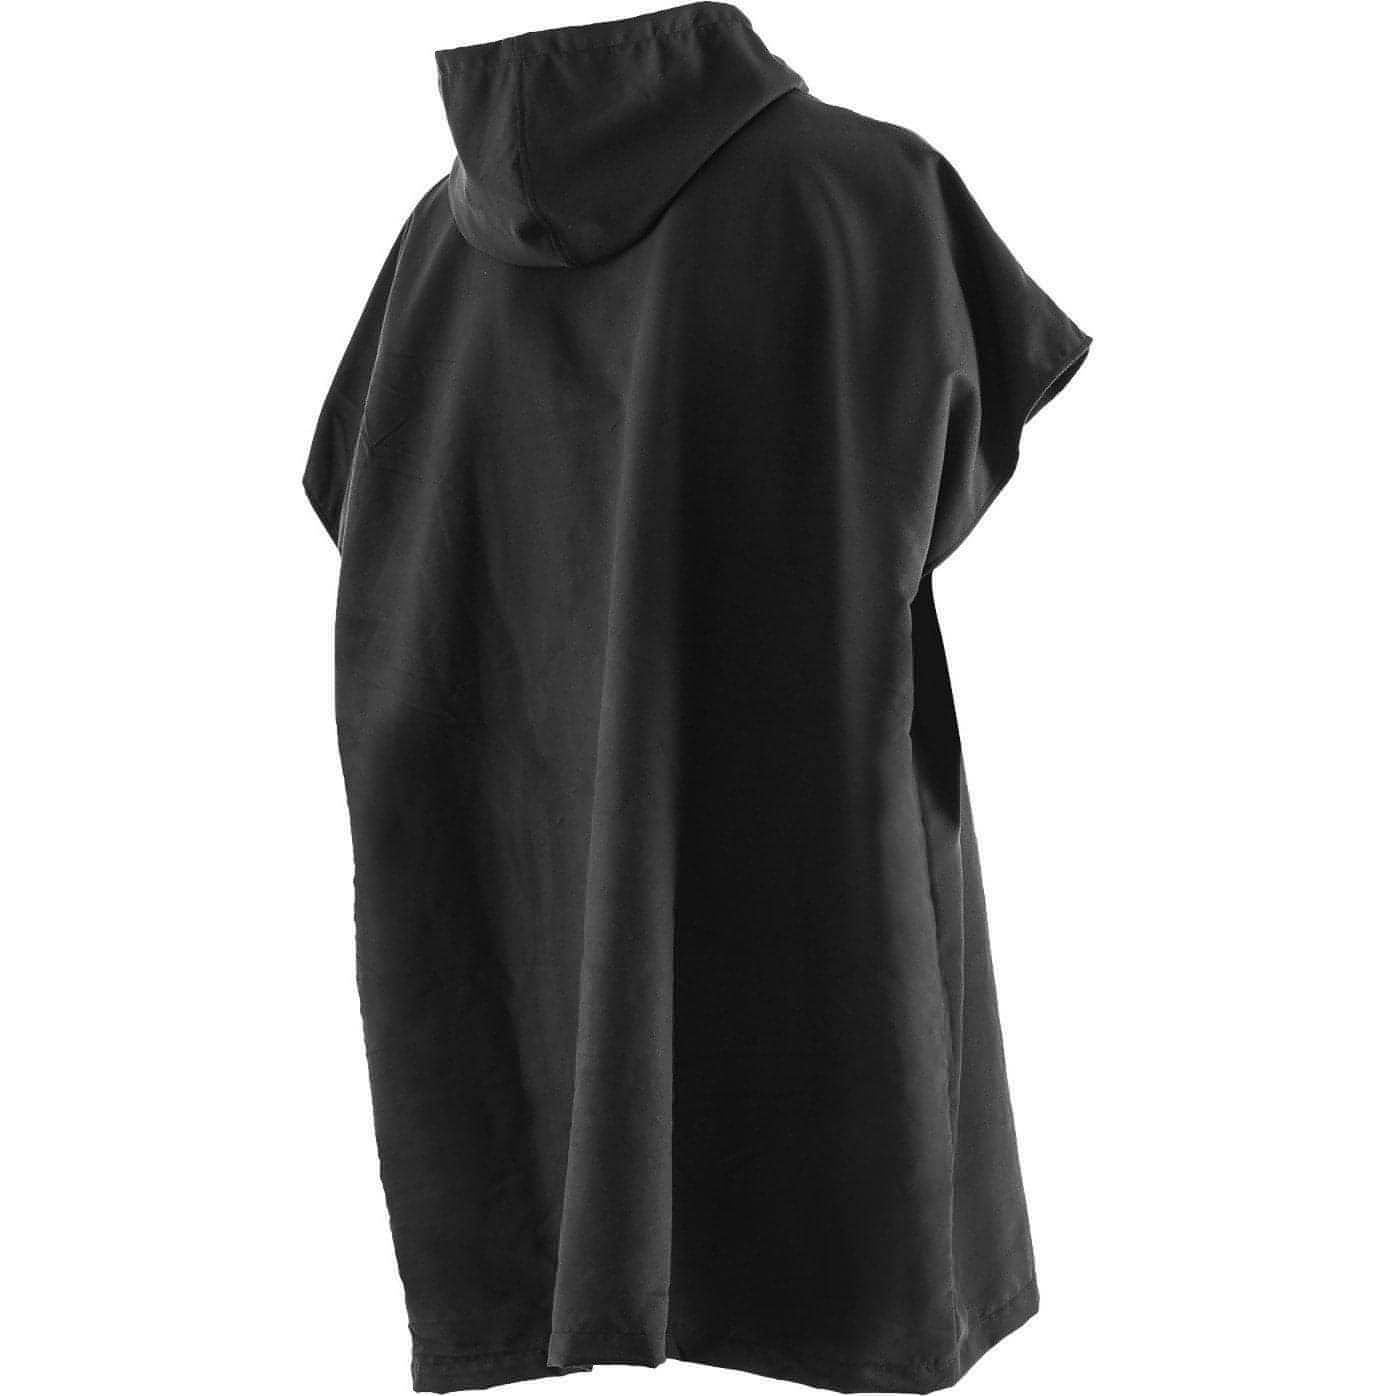 Orca Poncho Towel Changing Robe - Black 8434446385469 - Start Fitness